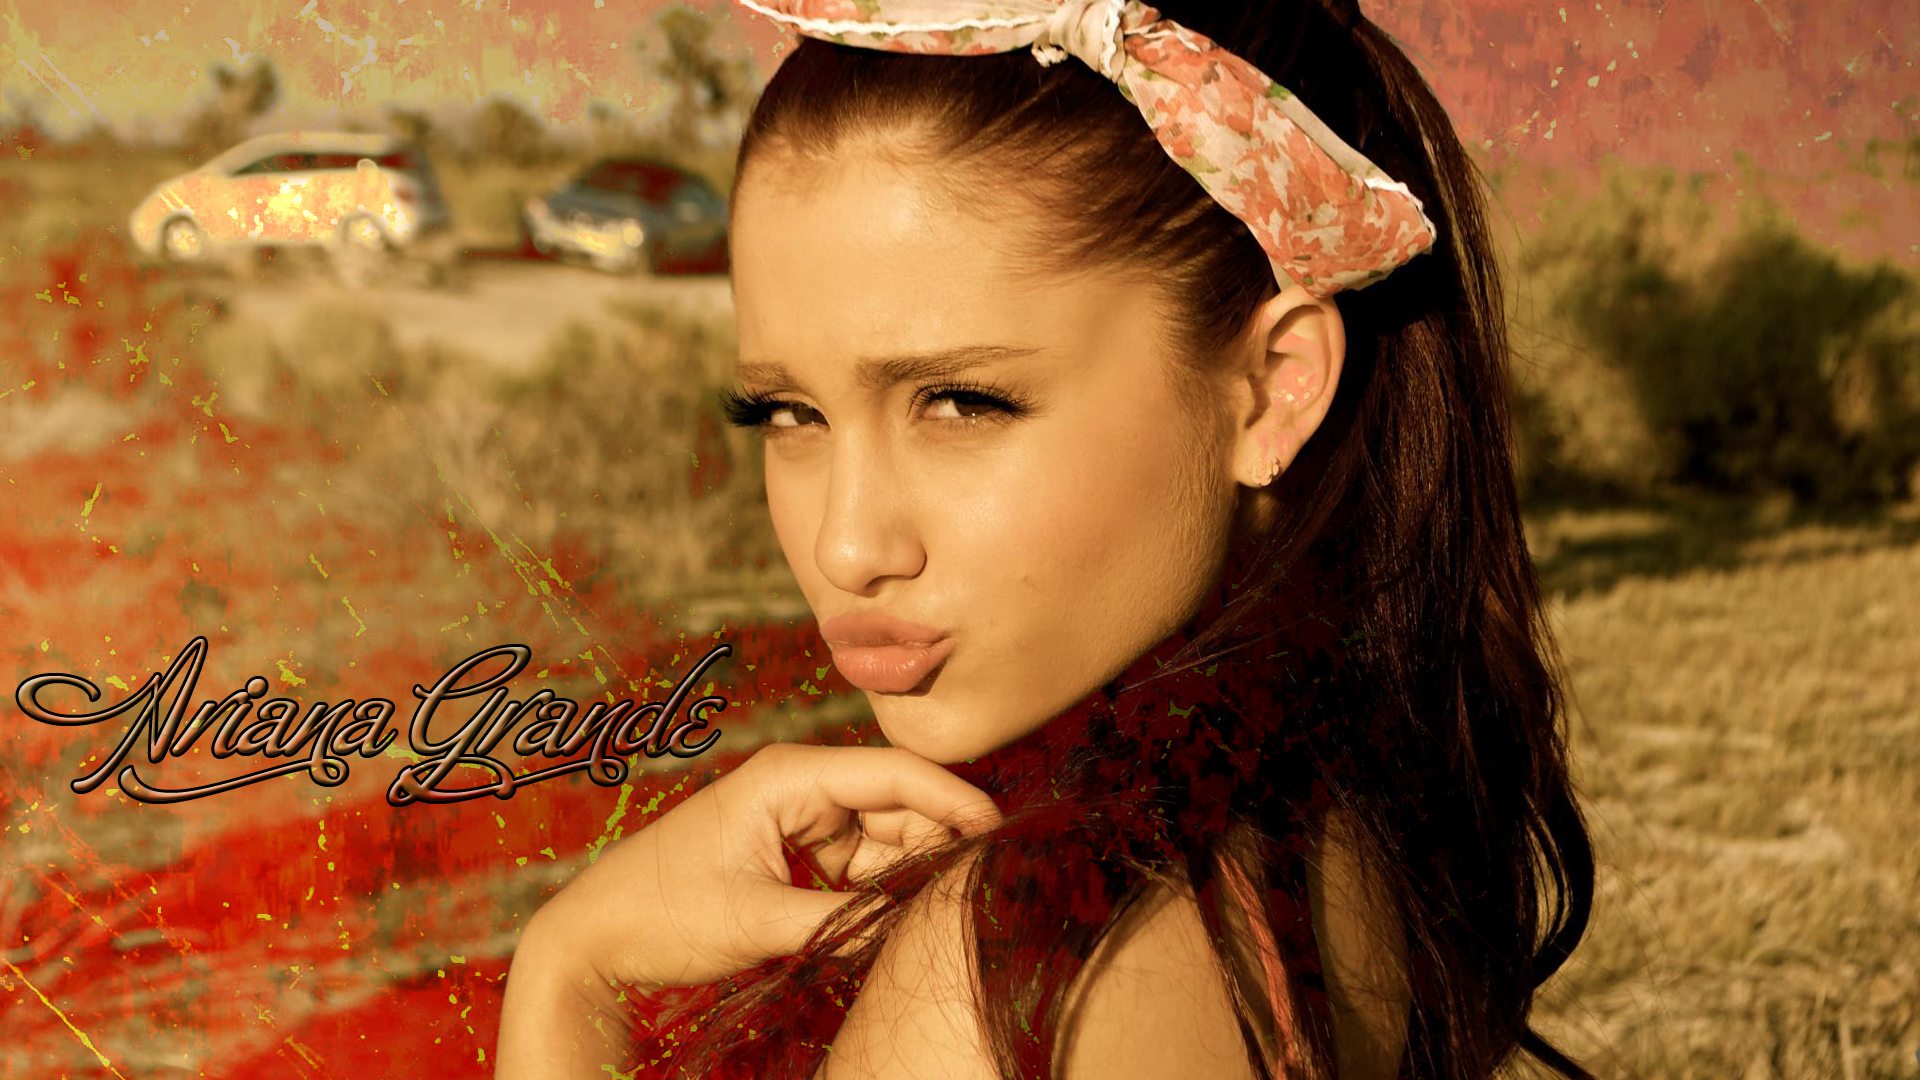 People 1920x1080 Ariana Grande celebrity singer brunette women pouting looking at viewer face typography closeup photoshopped